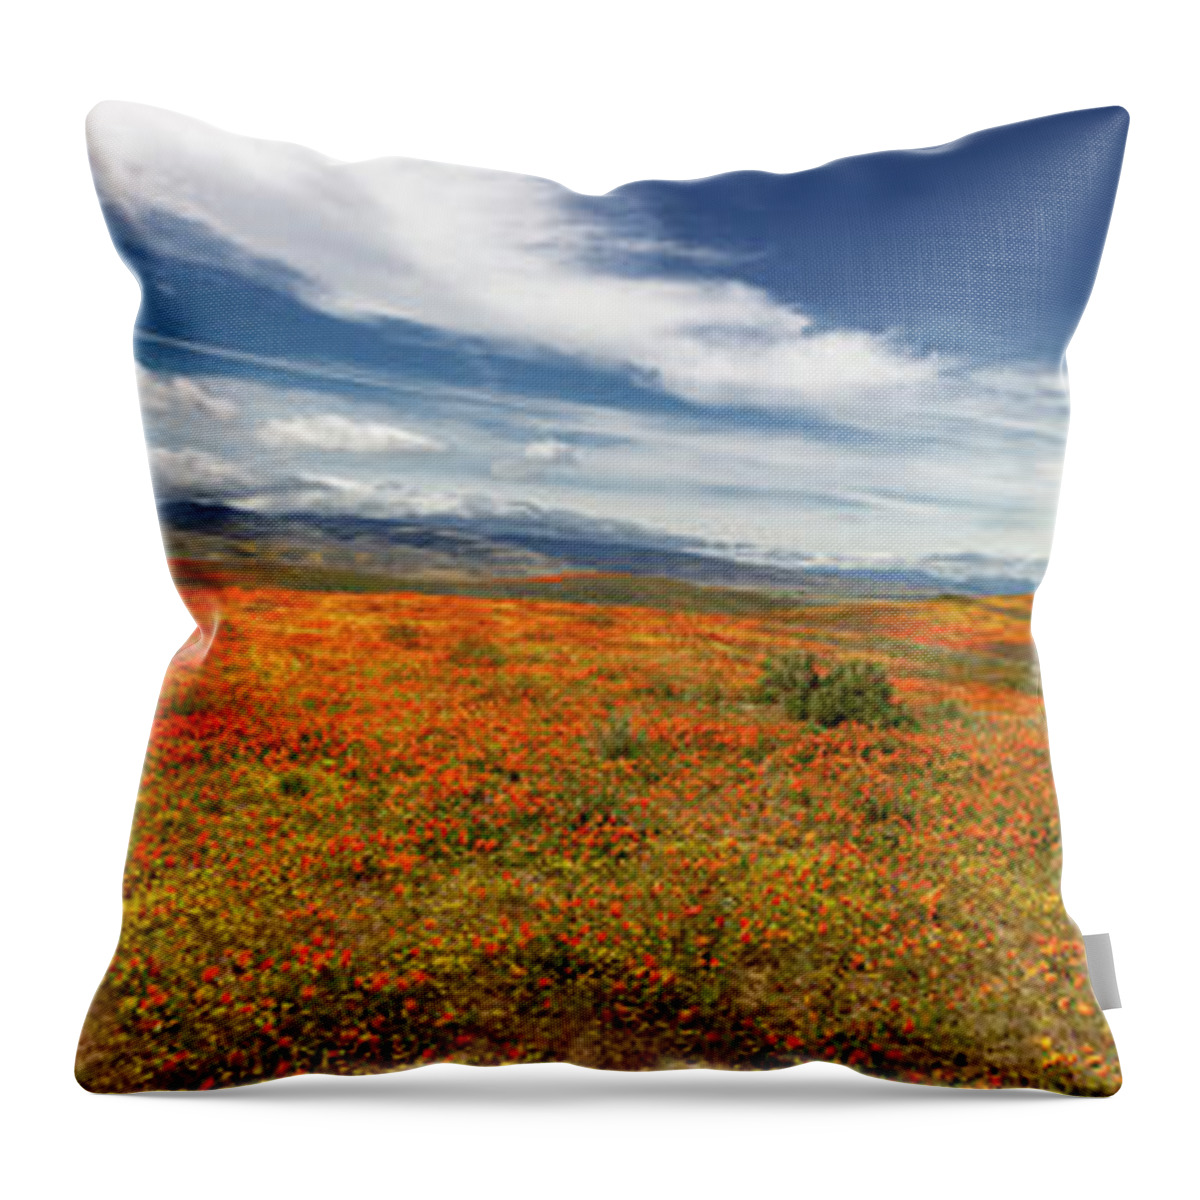 Antelope Valley Poppy Reserve Throw Pillow featuring the photograph Poppy Reserve Panorama 2 by Endre Balogh